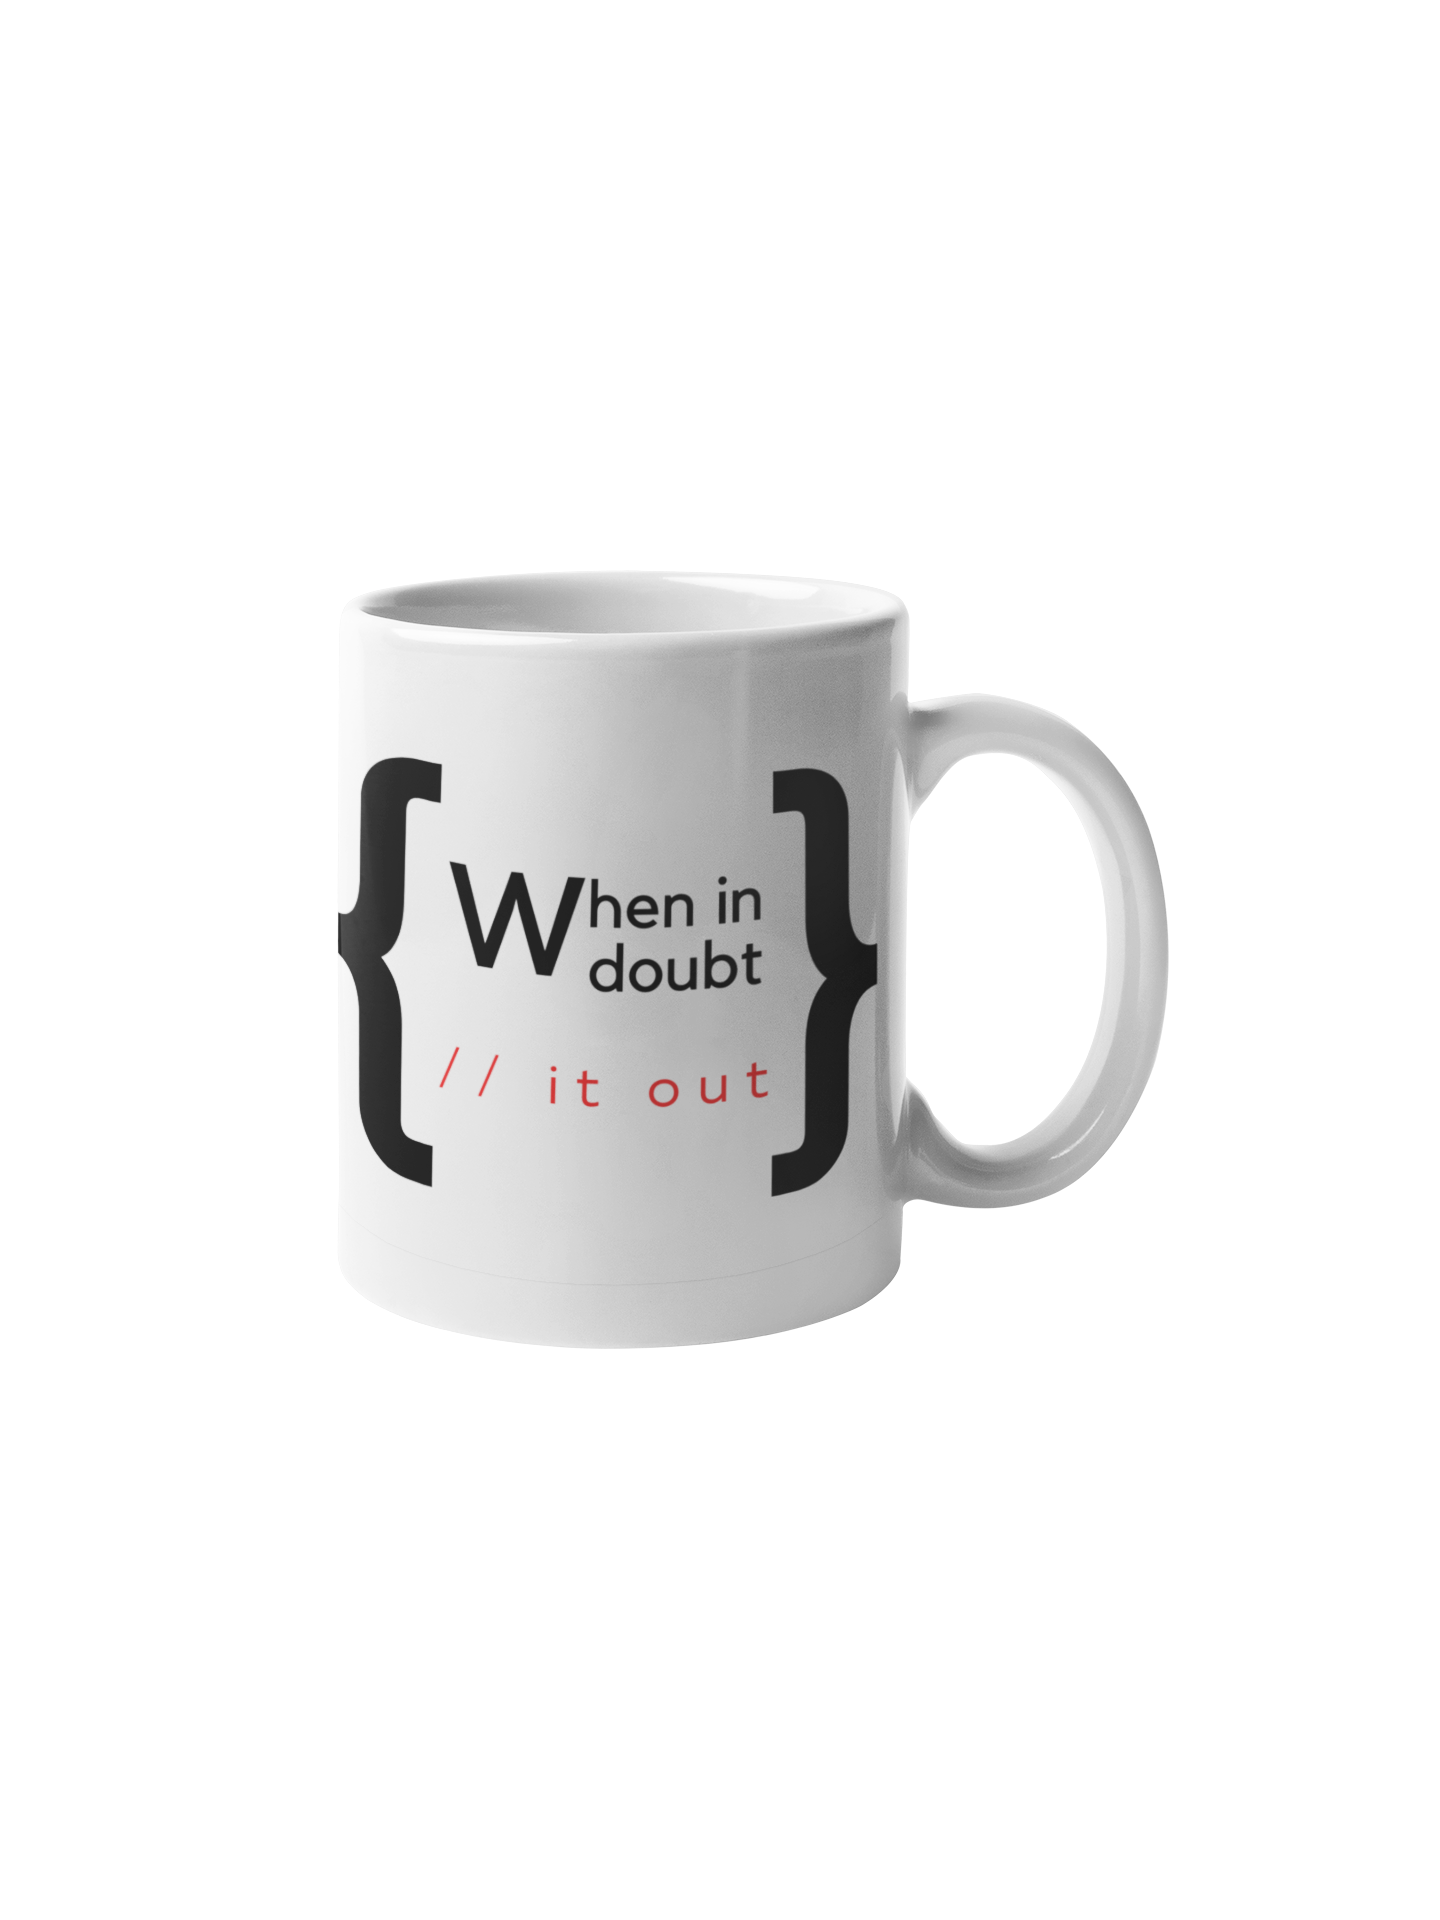 When in doubt // it out Mug